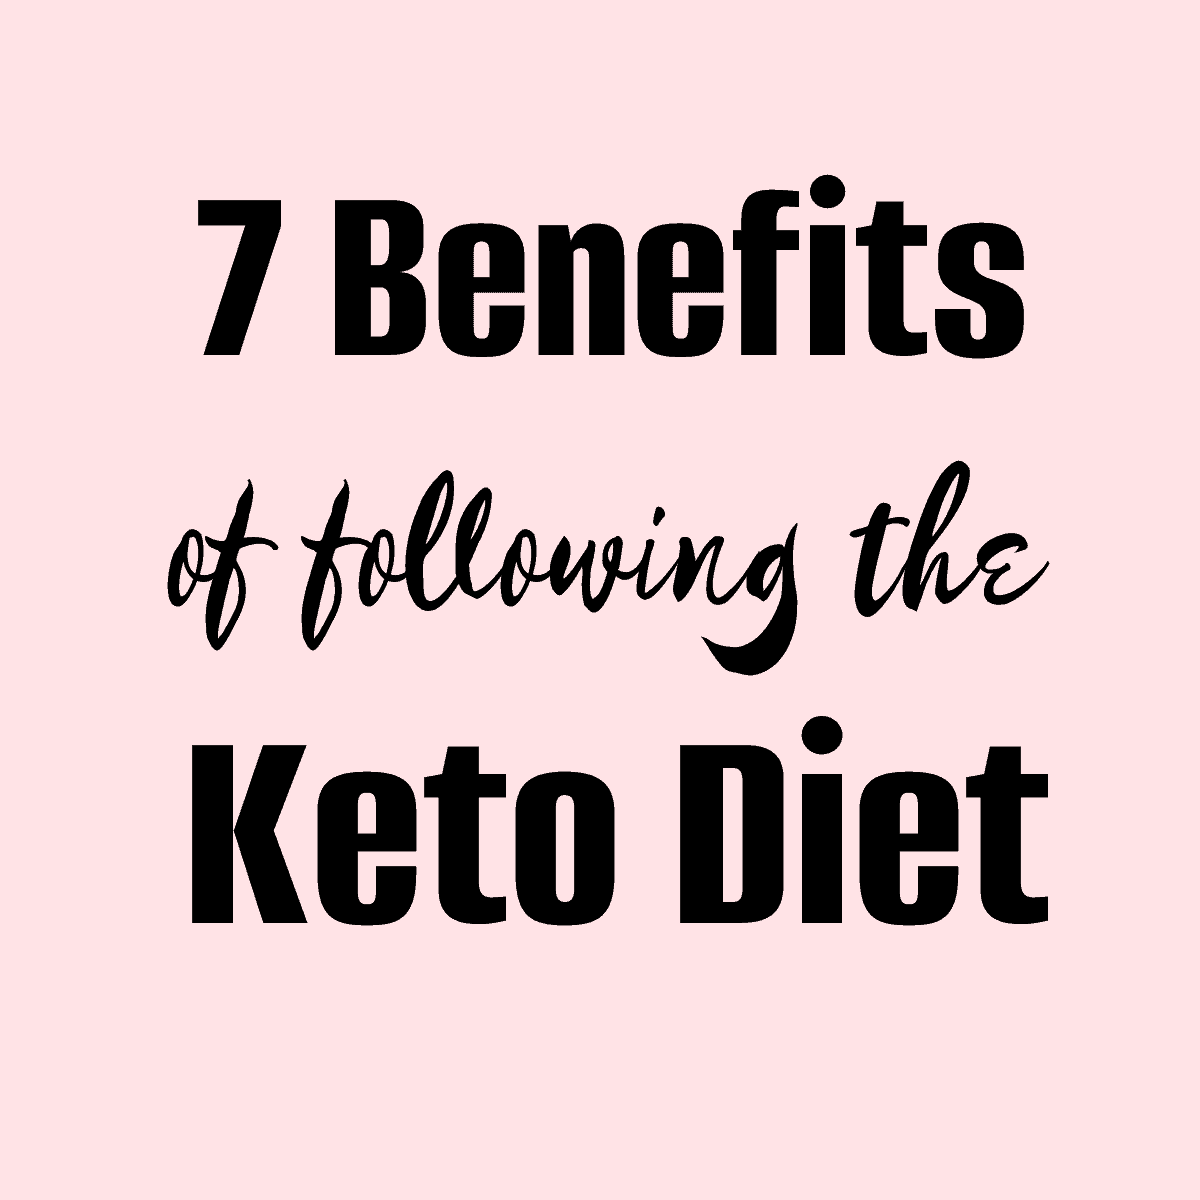 7 Benefits of the Ketogenic Diet